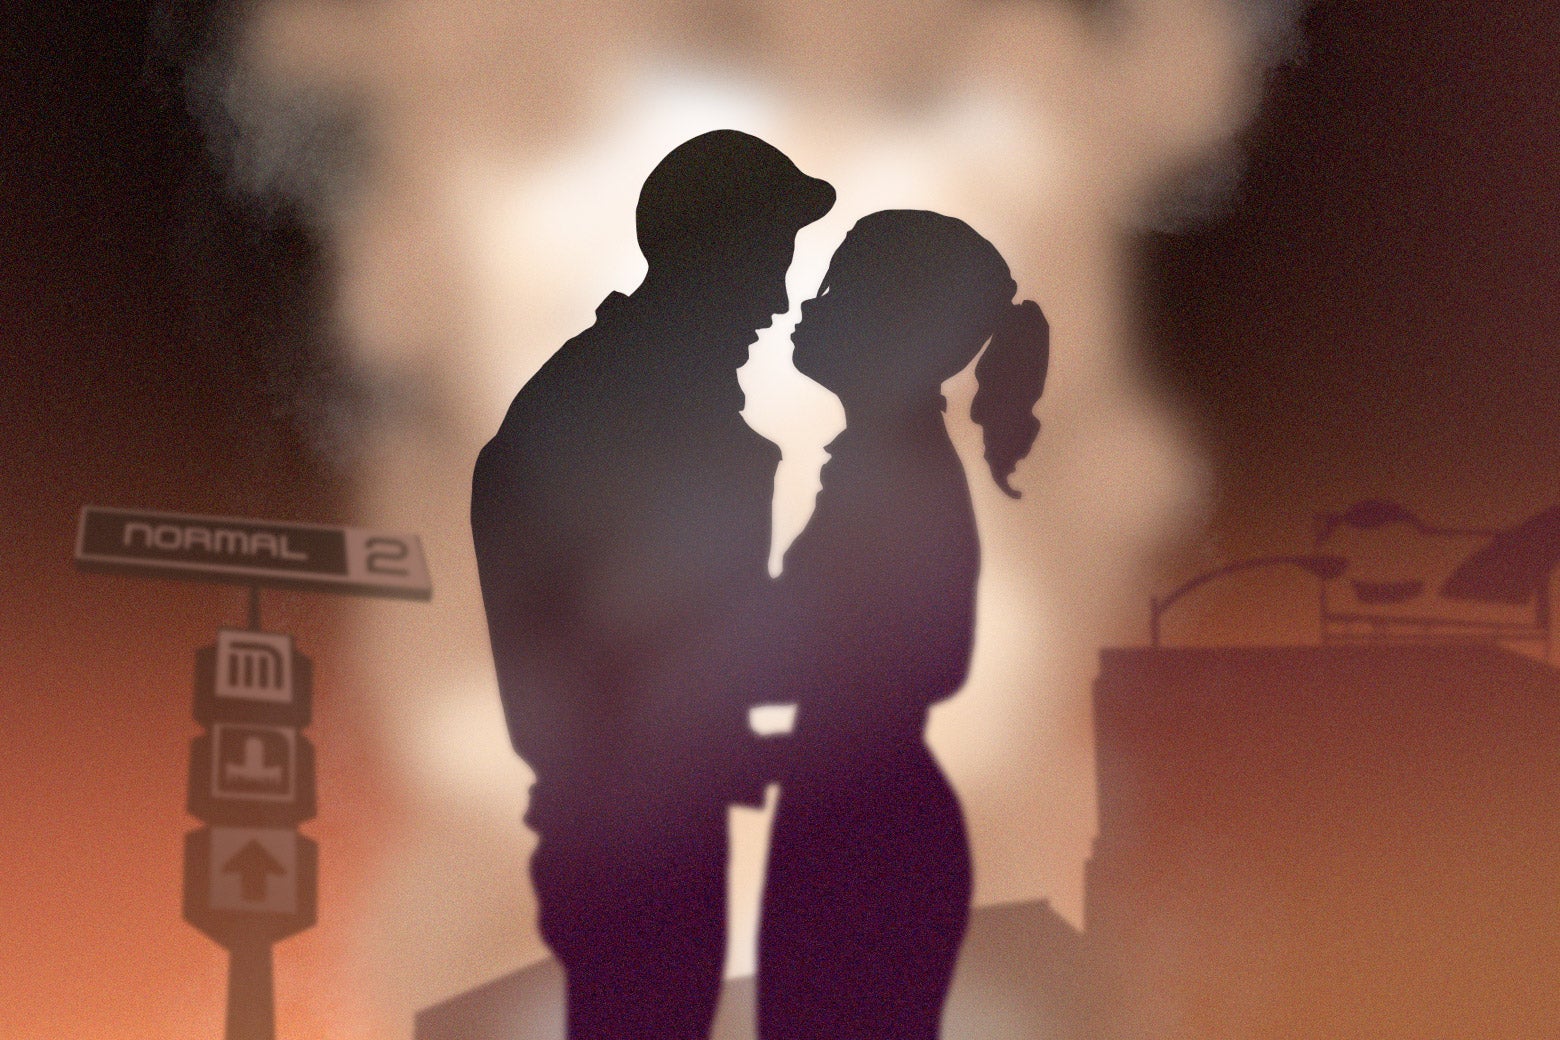 A silhouette of a couple embracing against a rising cloud of smoke and a factory